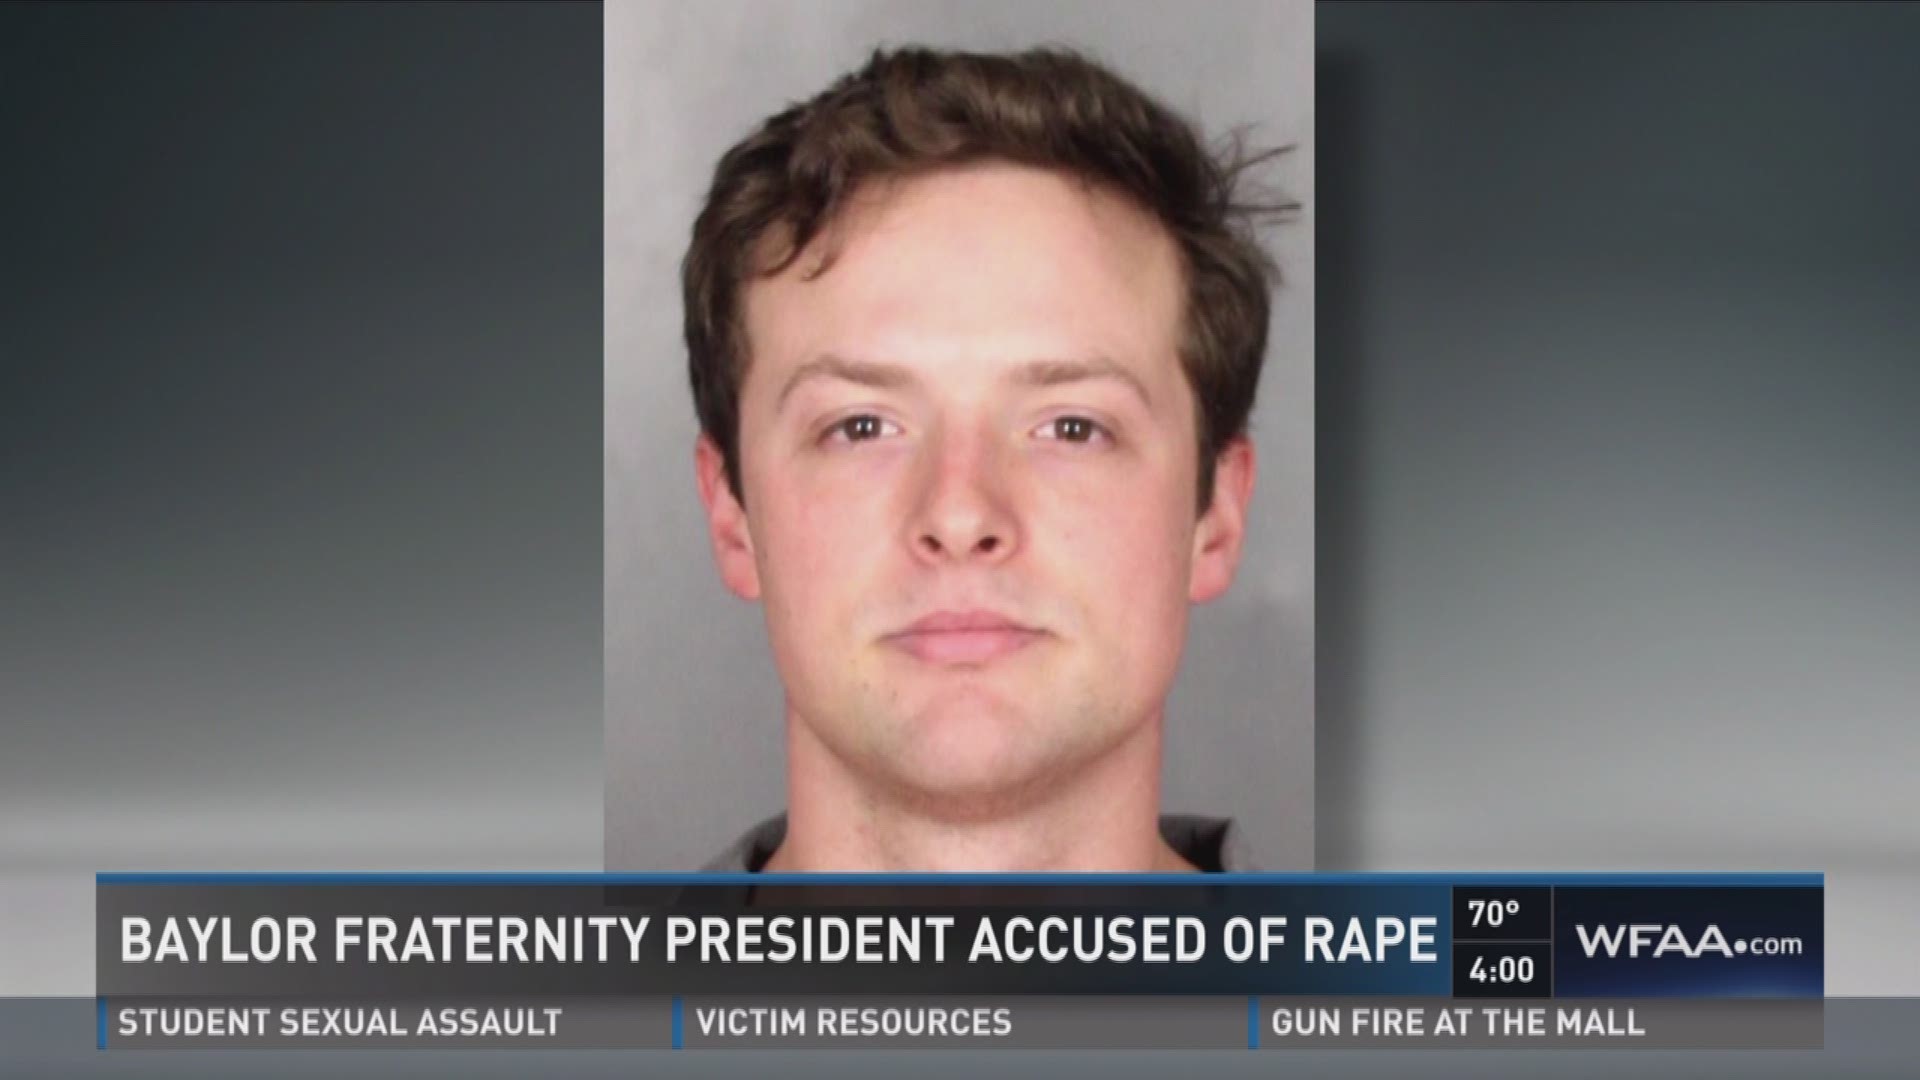 Baylor fraternity president accused of rape